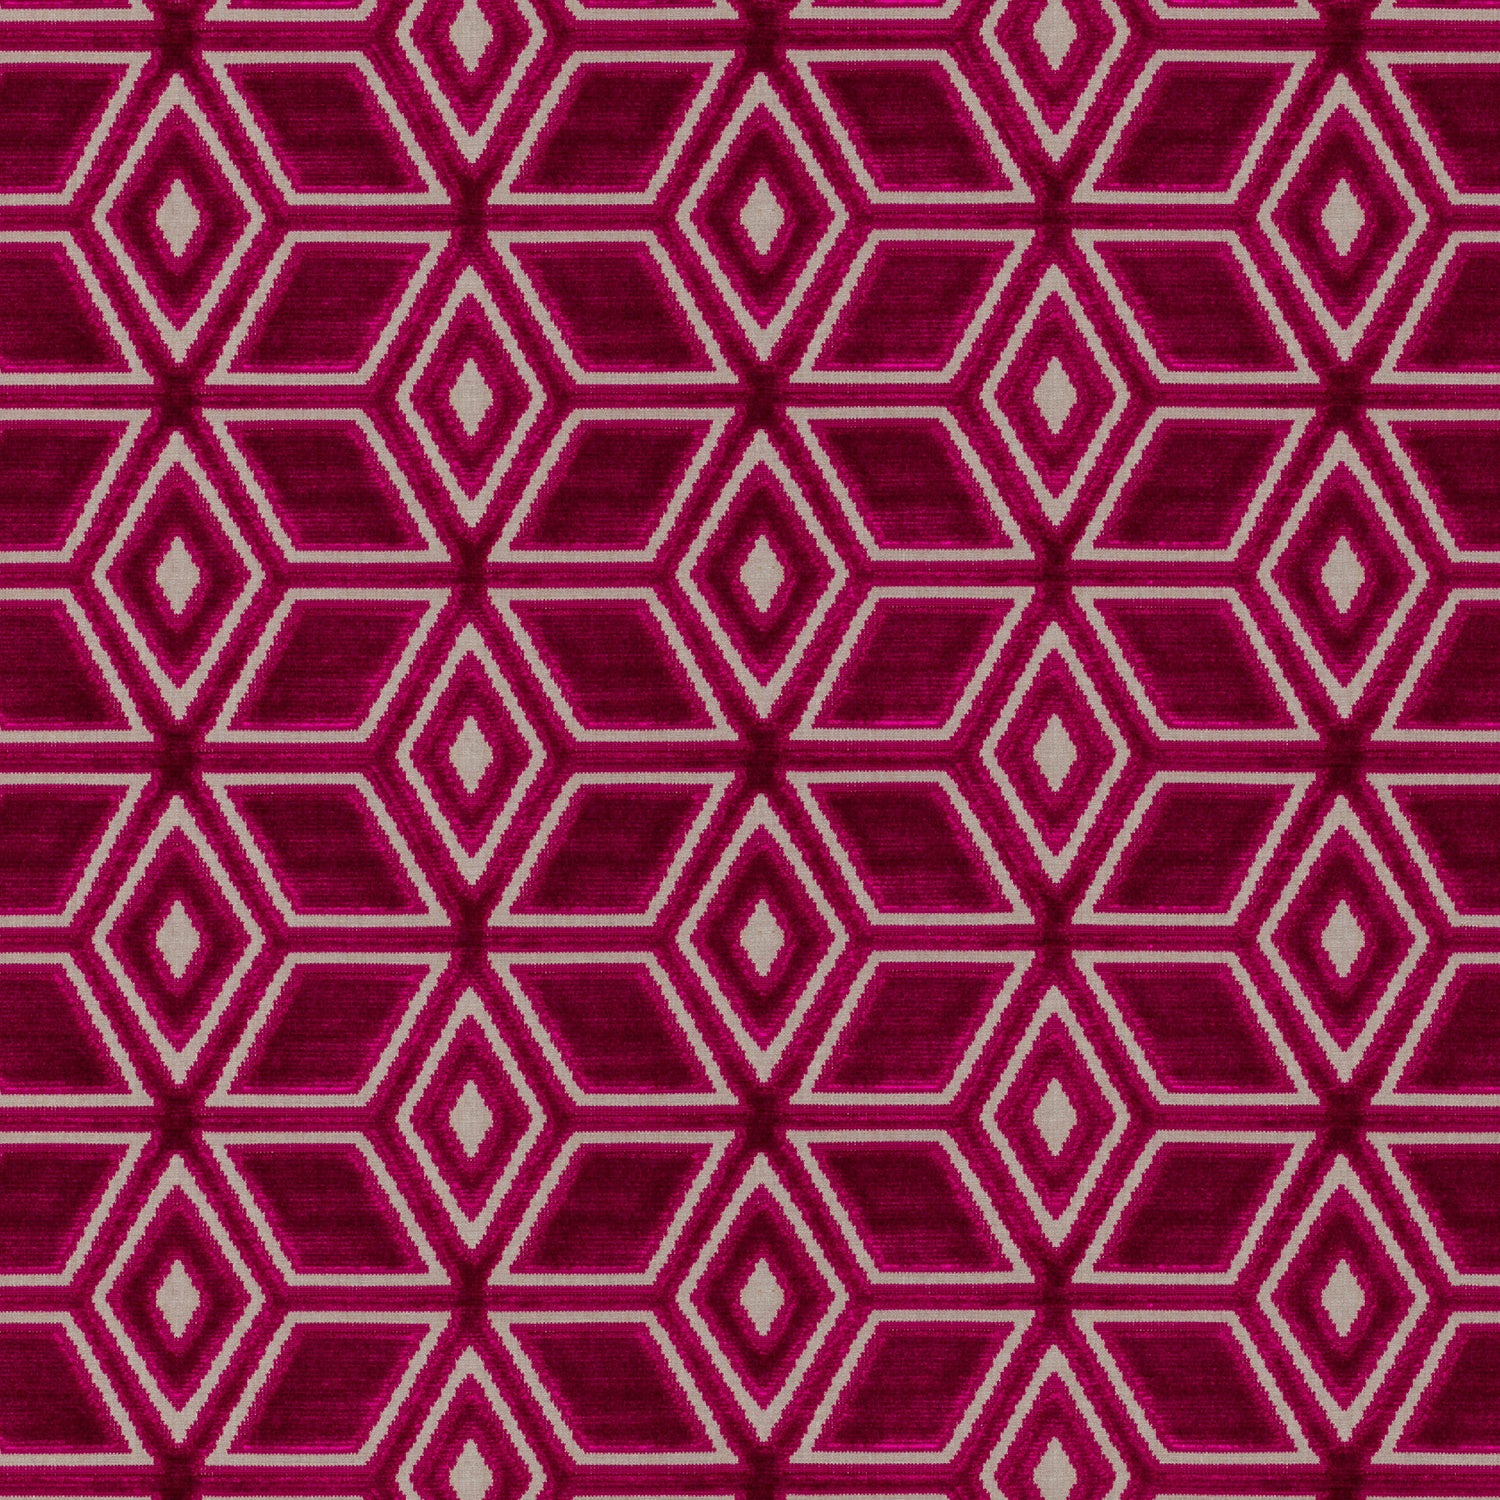 Jardin Maze fabric in fuchsia color - pattern number AW72984 - by Anna French in the Manor collection